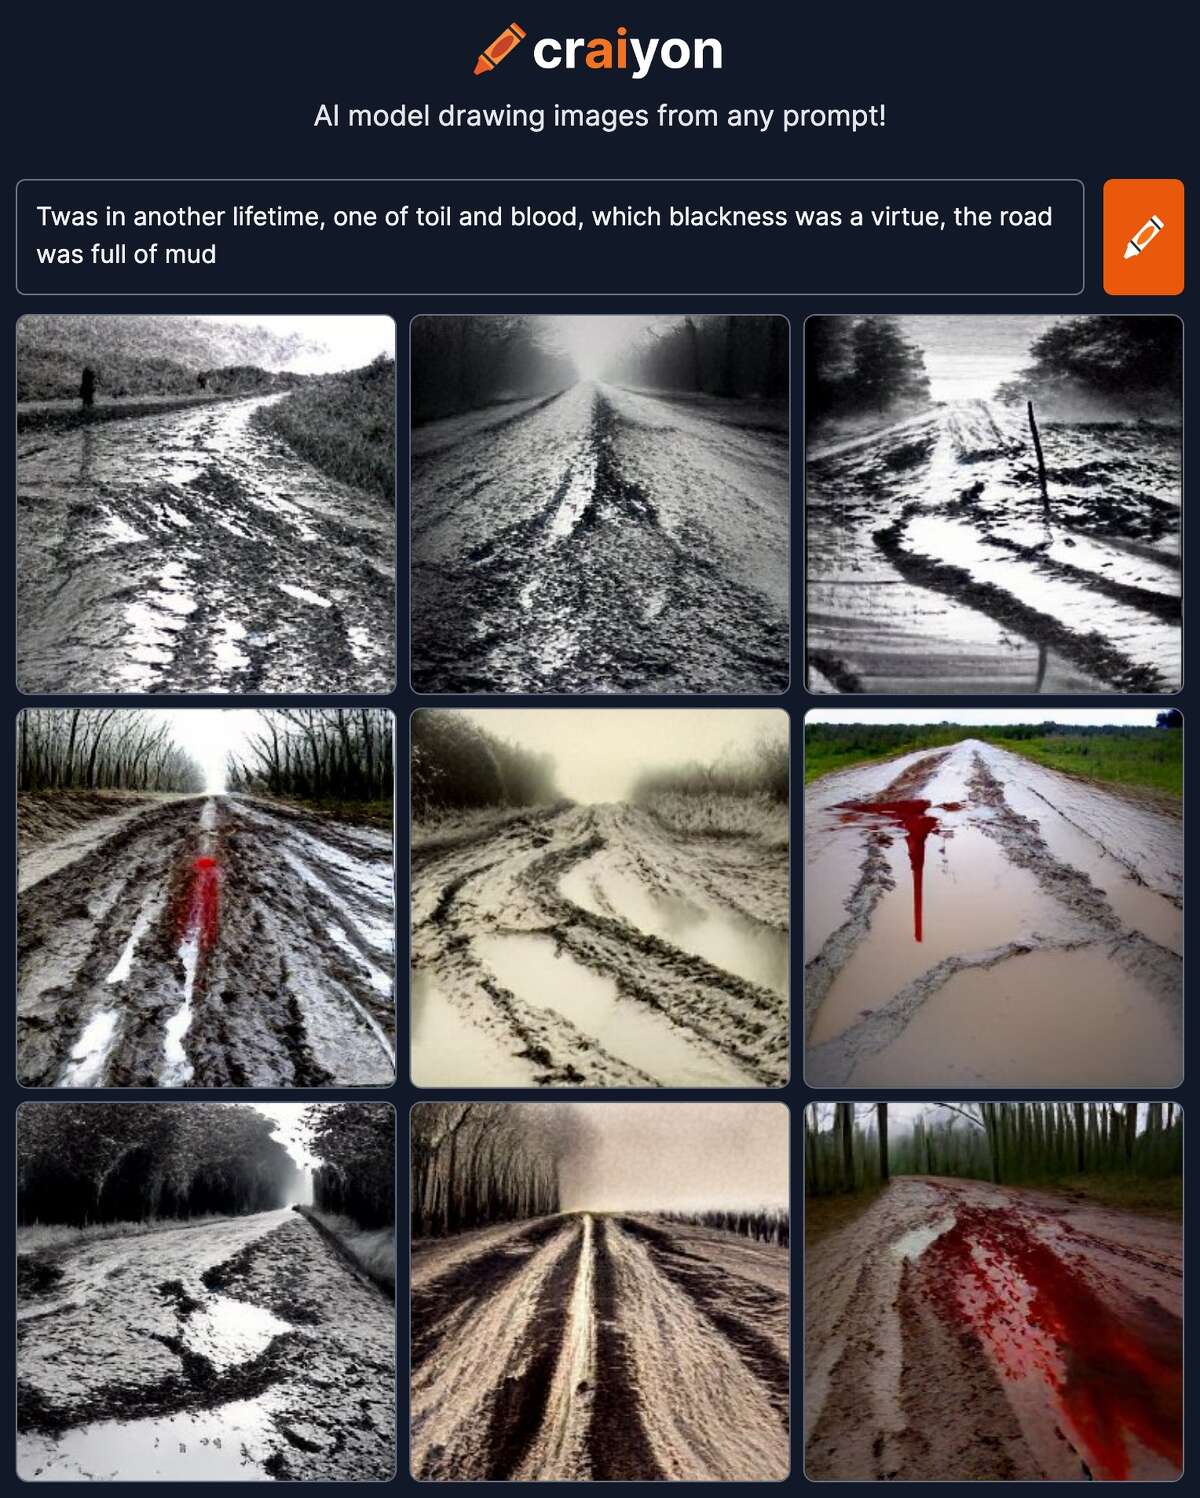 Song lyrics frequently generate interesting pictures in text2image AI models. The text prompt "Twas in another lifetime, one of toil and blood, when blackness was a virtue, the road was full of mud" from Bob Dylan's "Shelter from the Storm" was entered into the AI model Craiyon. 